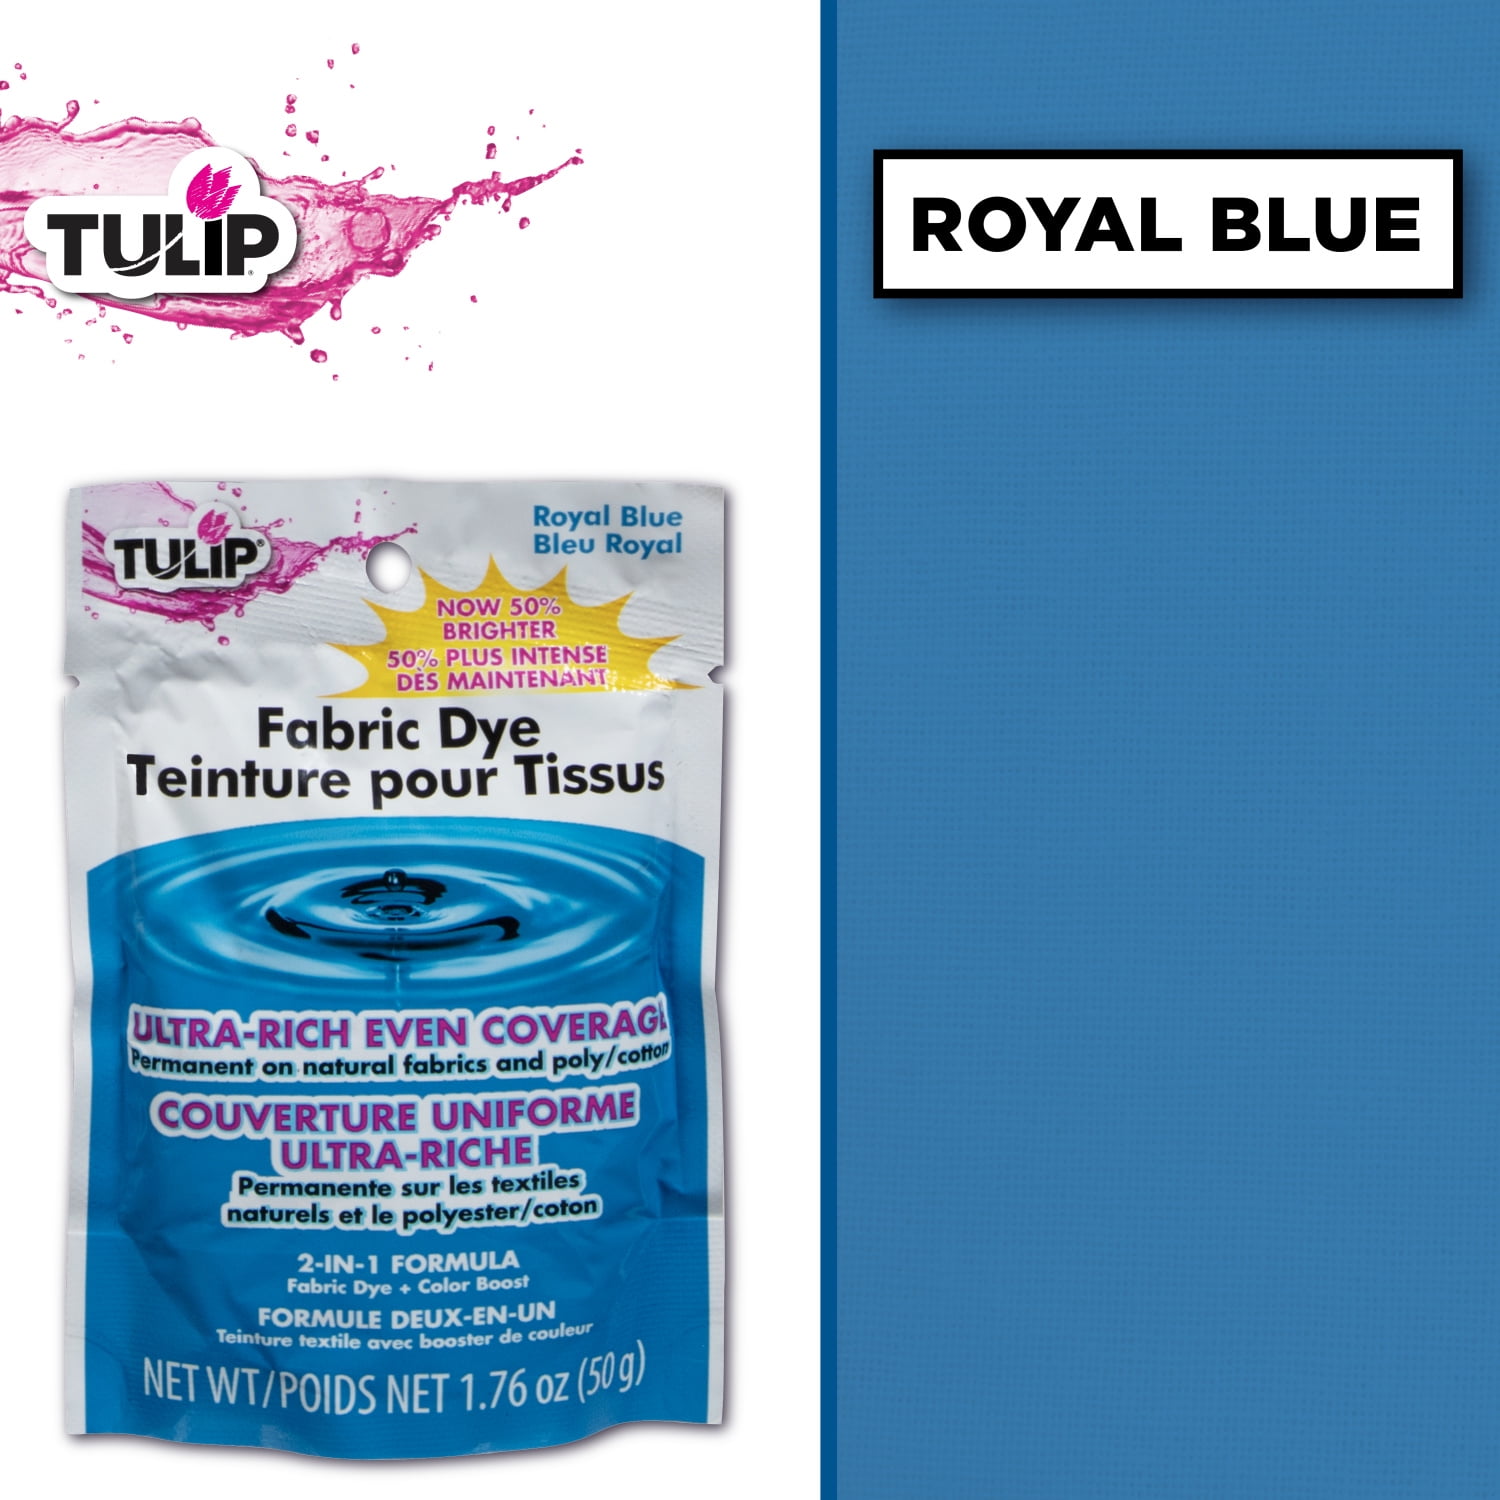 Tulip Bright Pink, One-Color Permanent Fabric Dye